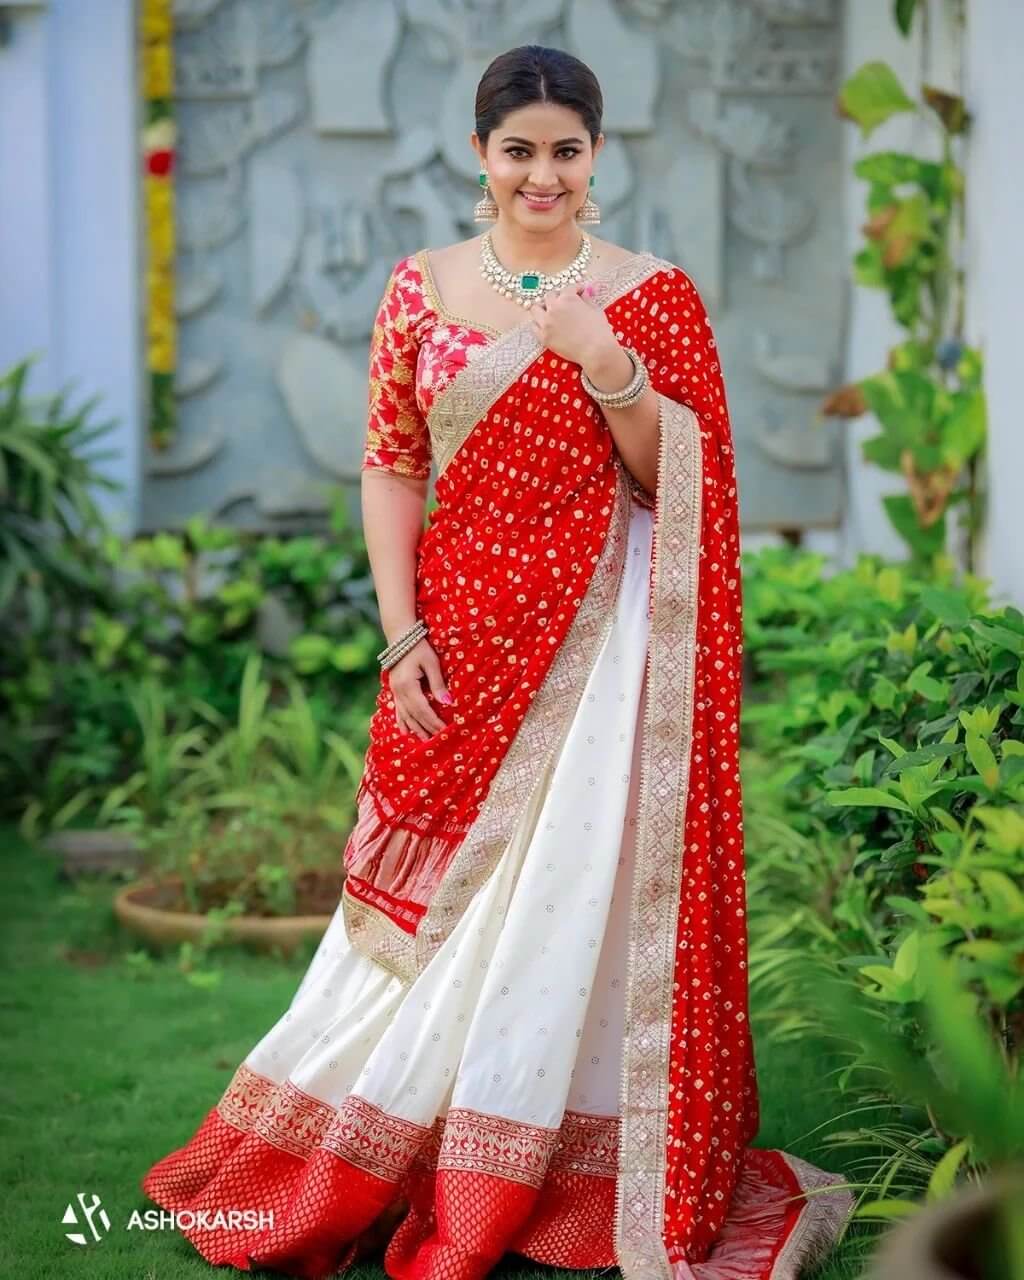 Sneha Breathtaking Look In Red Bandhani Saree & With Chic Bun Hairstyle